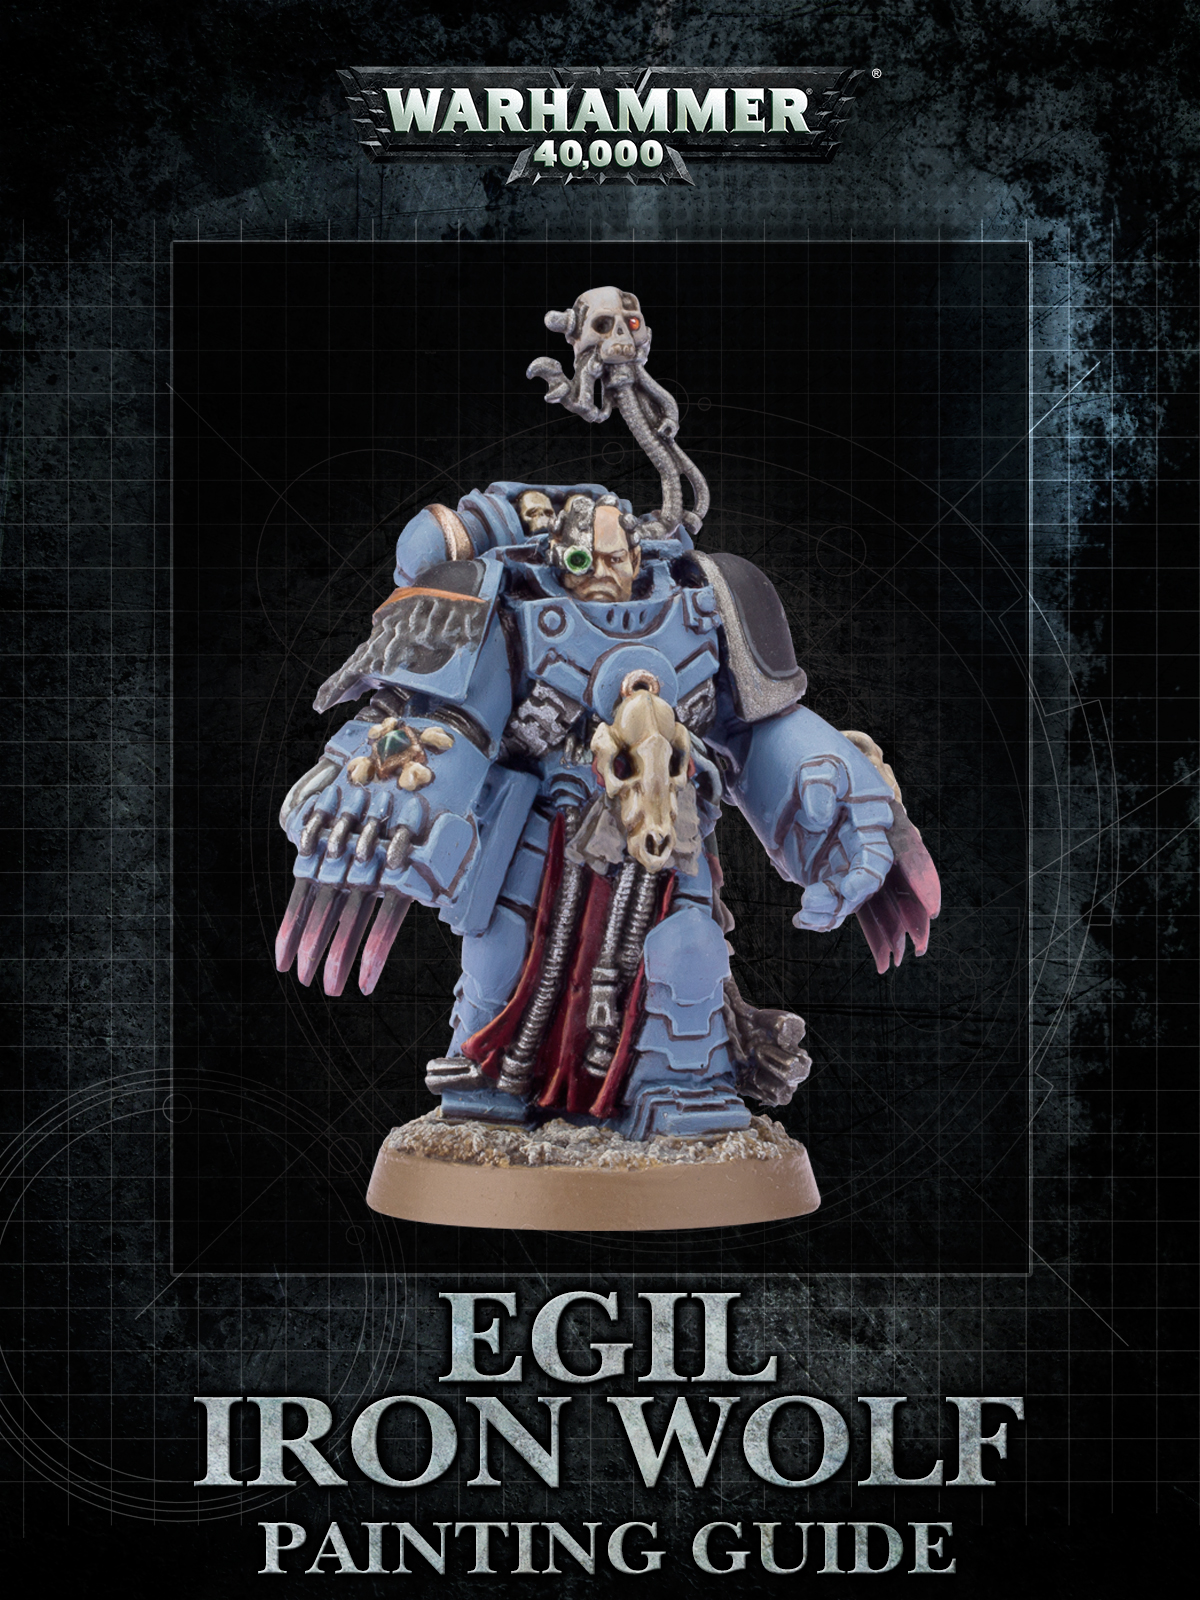 Painting Guide - Egil Iron Wolf